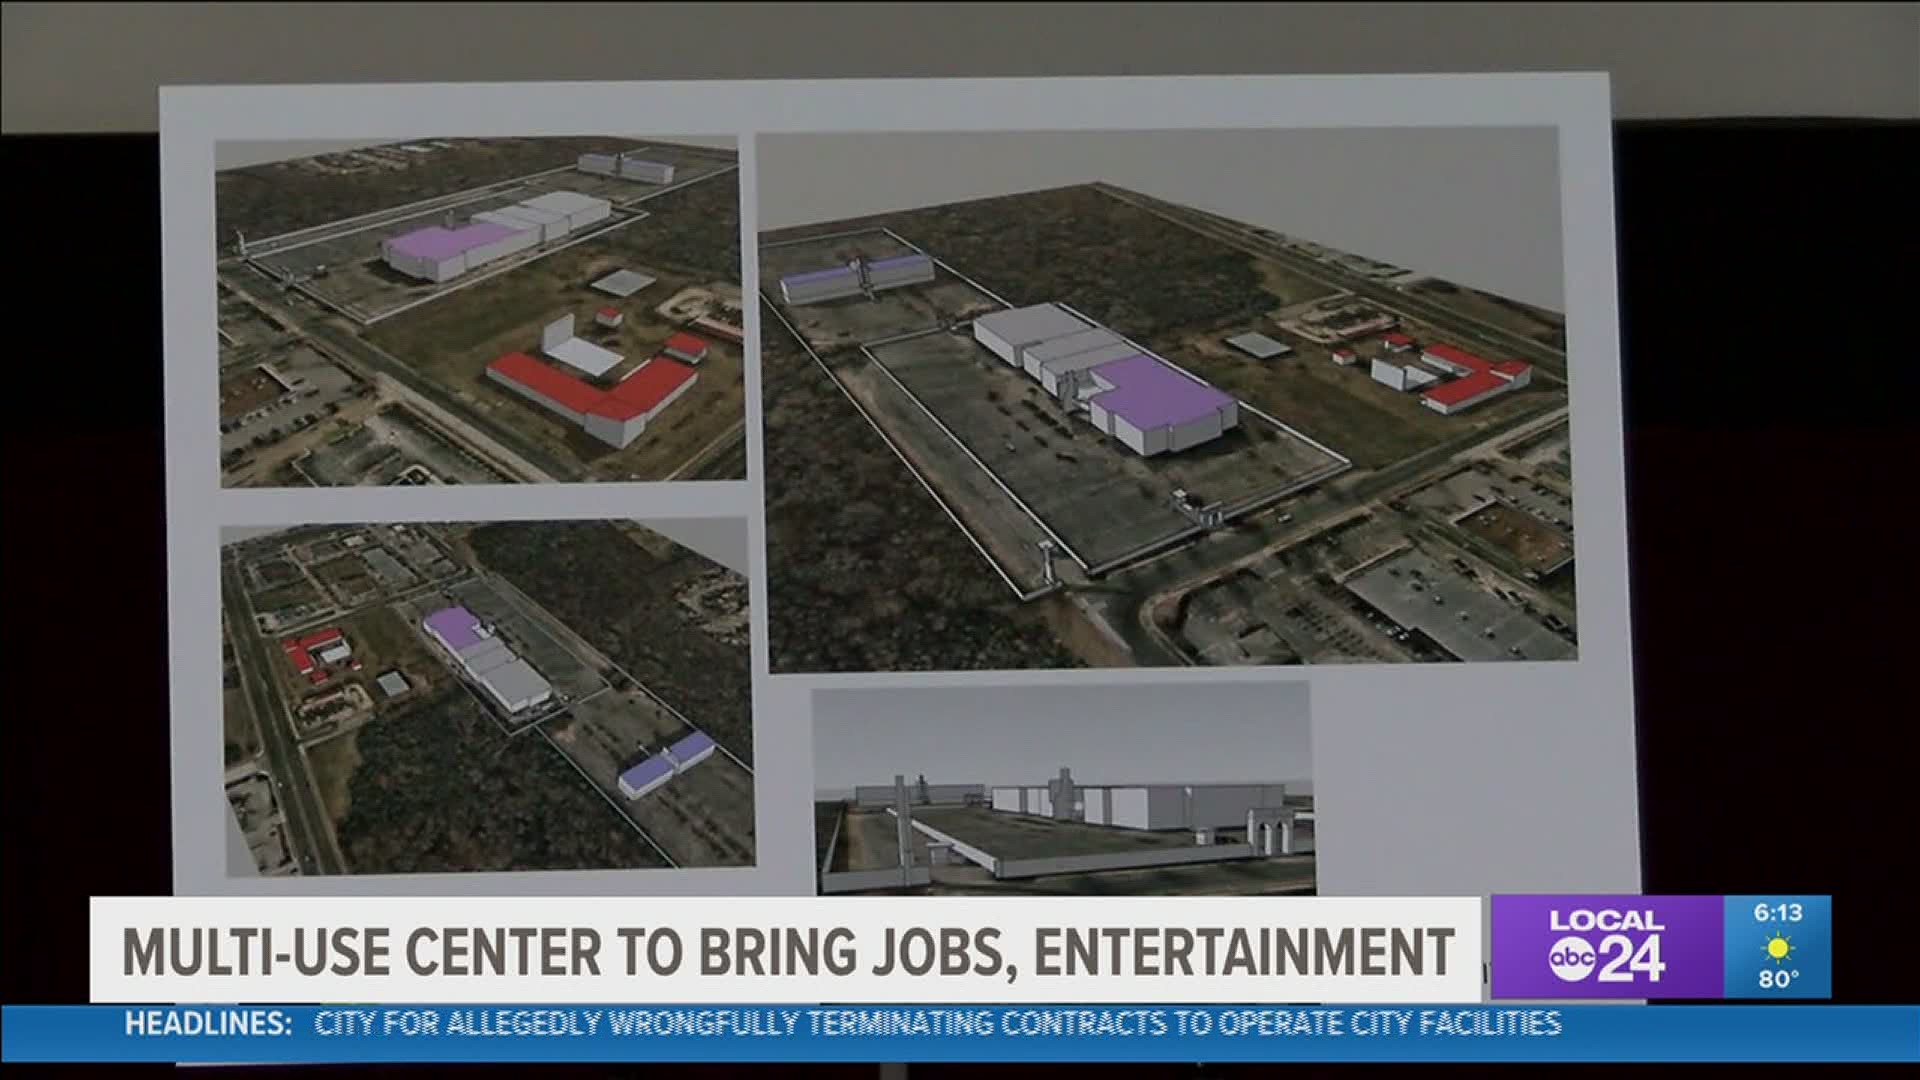 The center is promising jobs, activities for kids, and teachable moments for people who want to be actors and musicians.